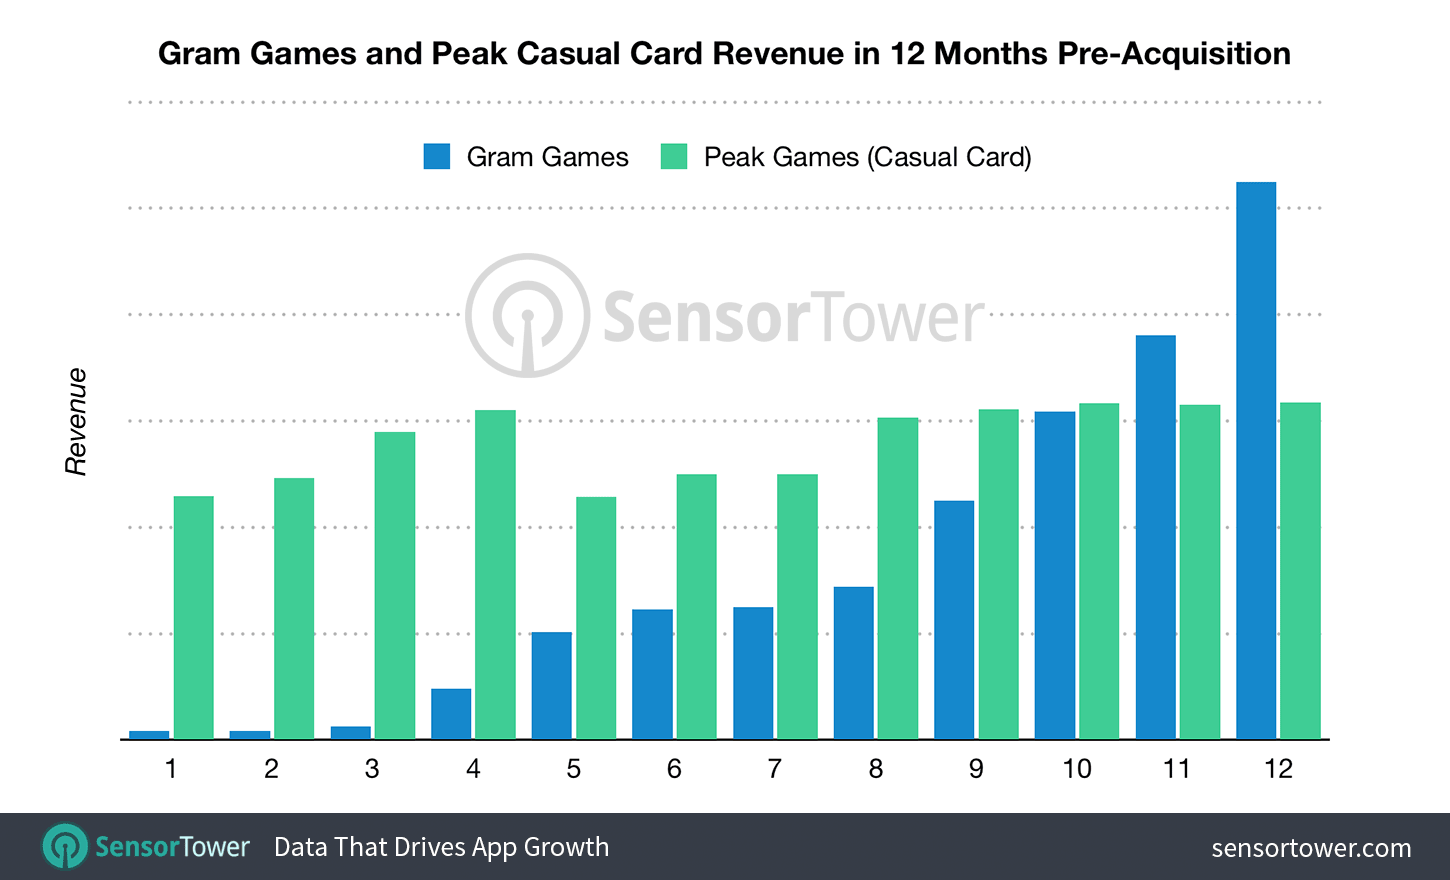 Chart showing the monthly revenue of Gram Games and Peak Games titles for 12 months prior to their acquisition by Zynga